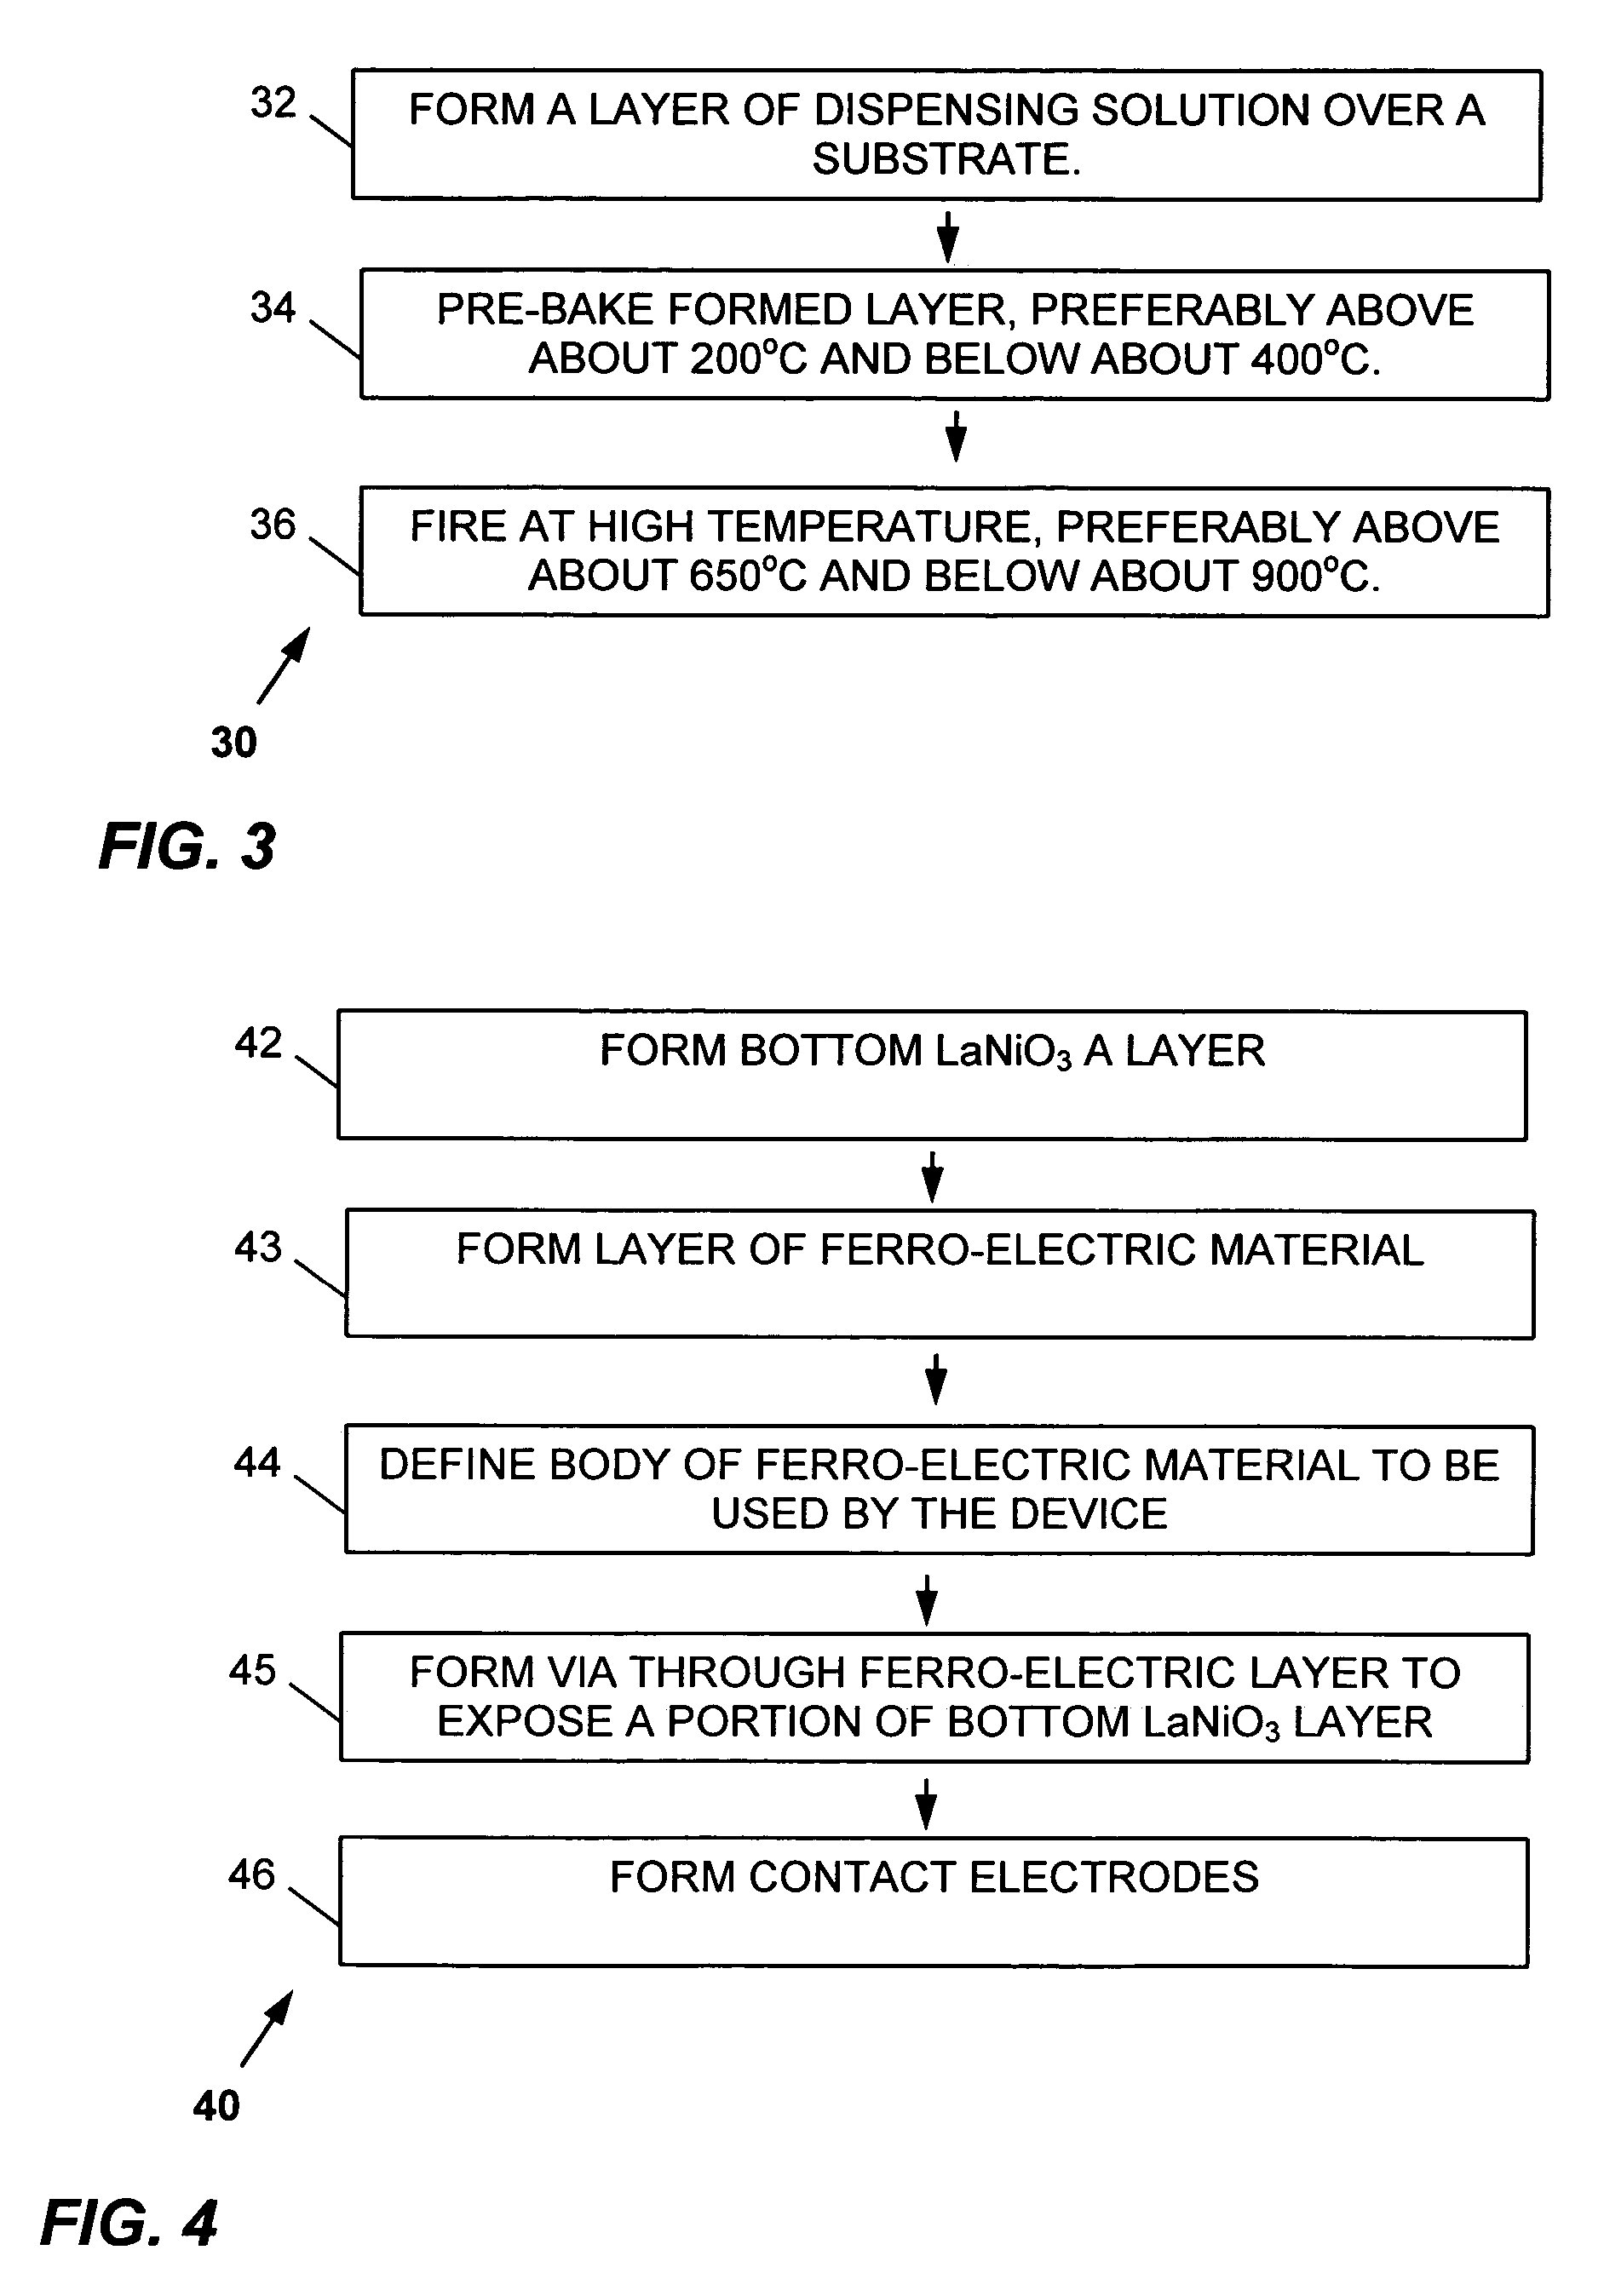 Methods of forming LaNiO3 conductive layers, ferro-electric devices with LaNiO3 layers, and precursor formation solutions